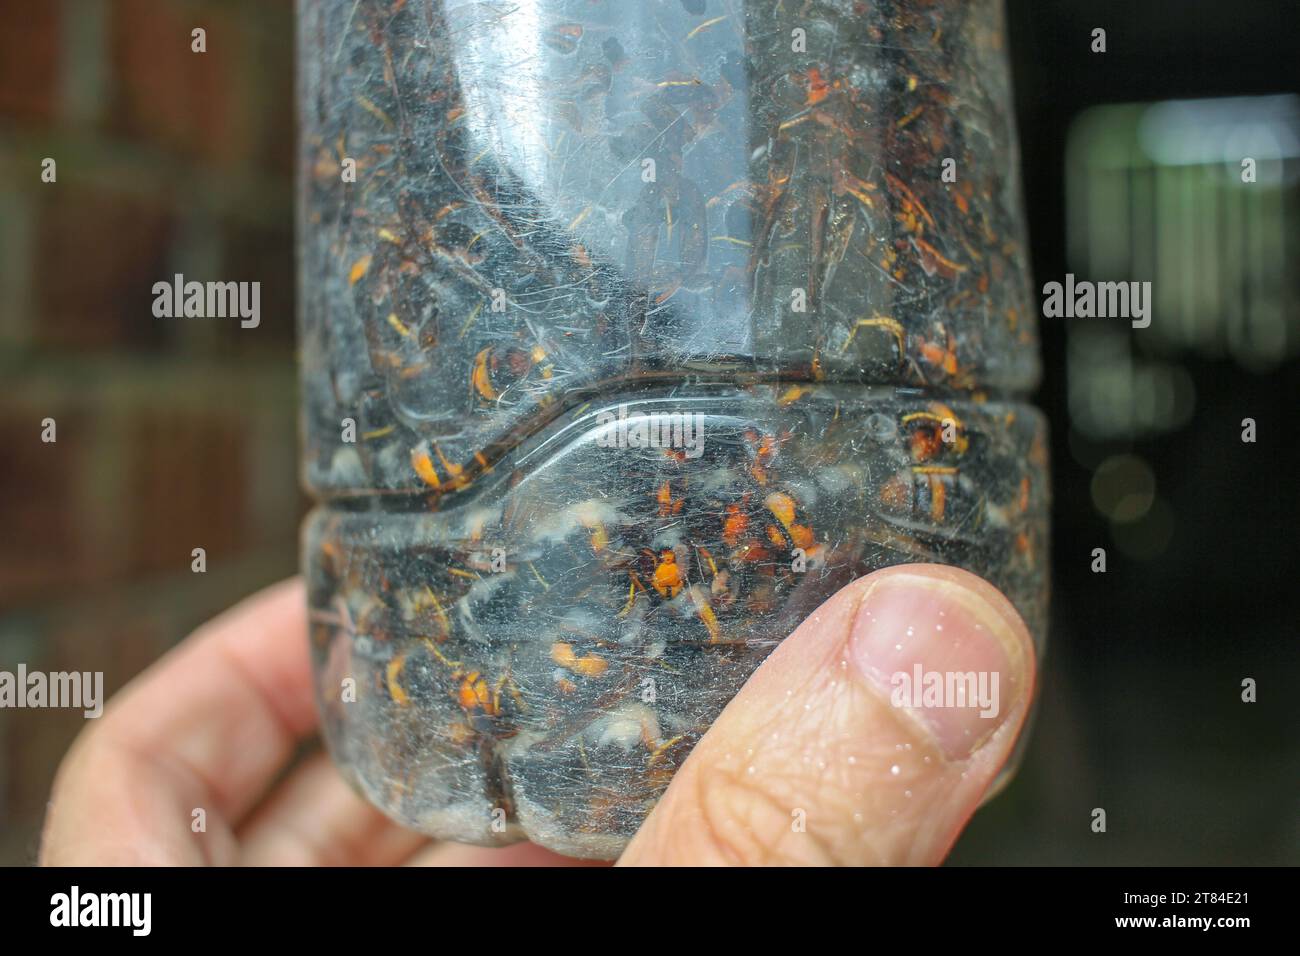 a home made trap for asian hornets in my hand Stock Photo